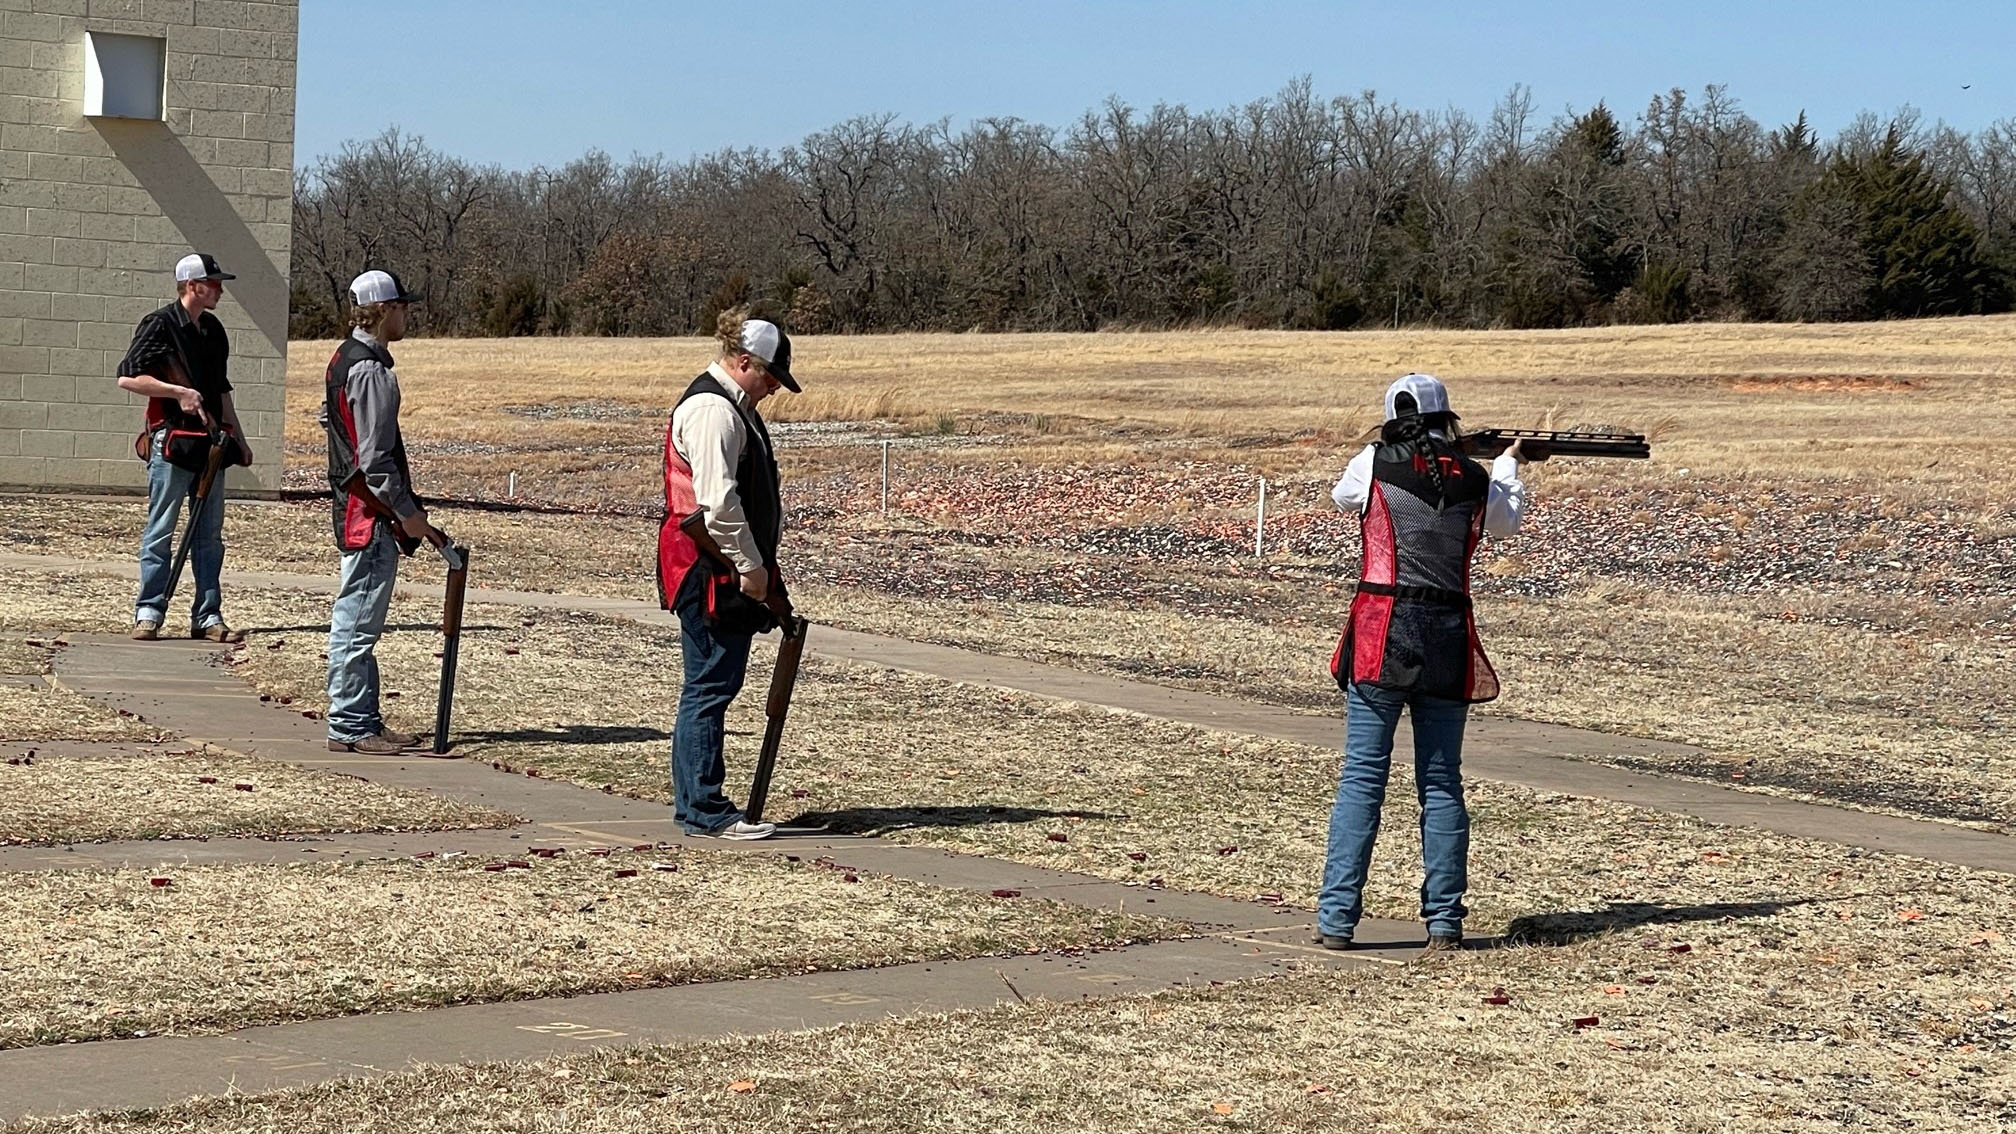 Aggie Shotgun Sports will host a Labor Day Sporting Clays event north of Maywood, starting at 9 a.m. (NCTA file photo)